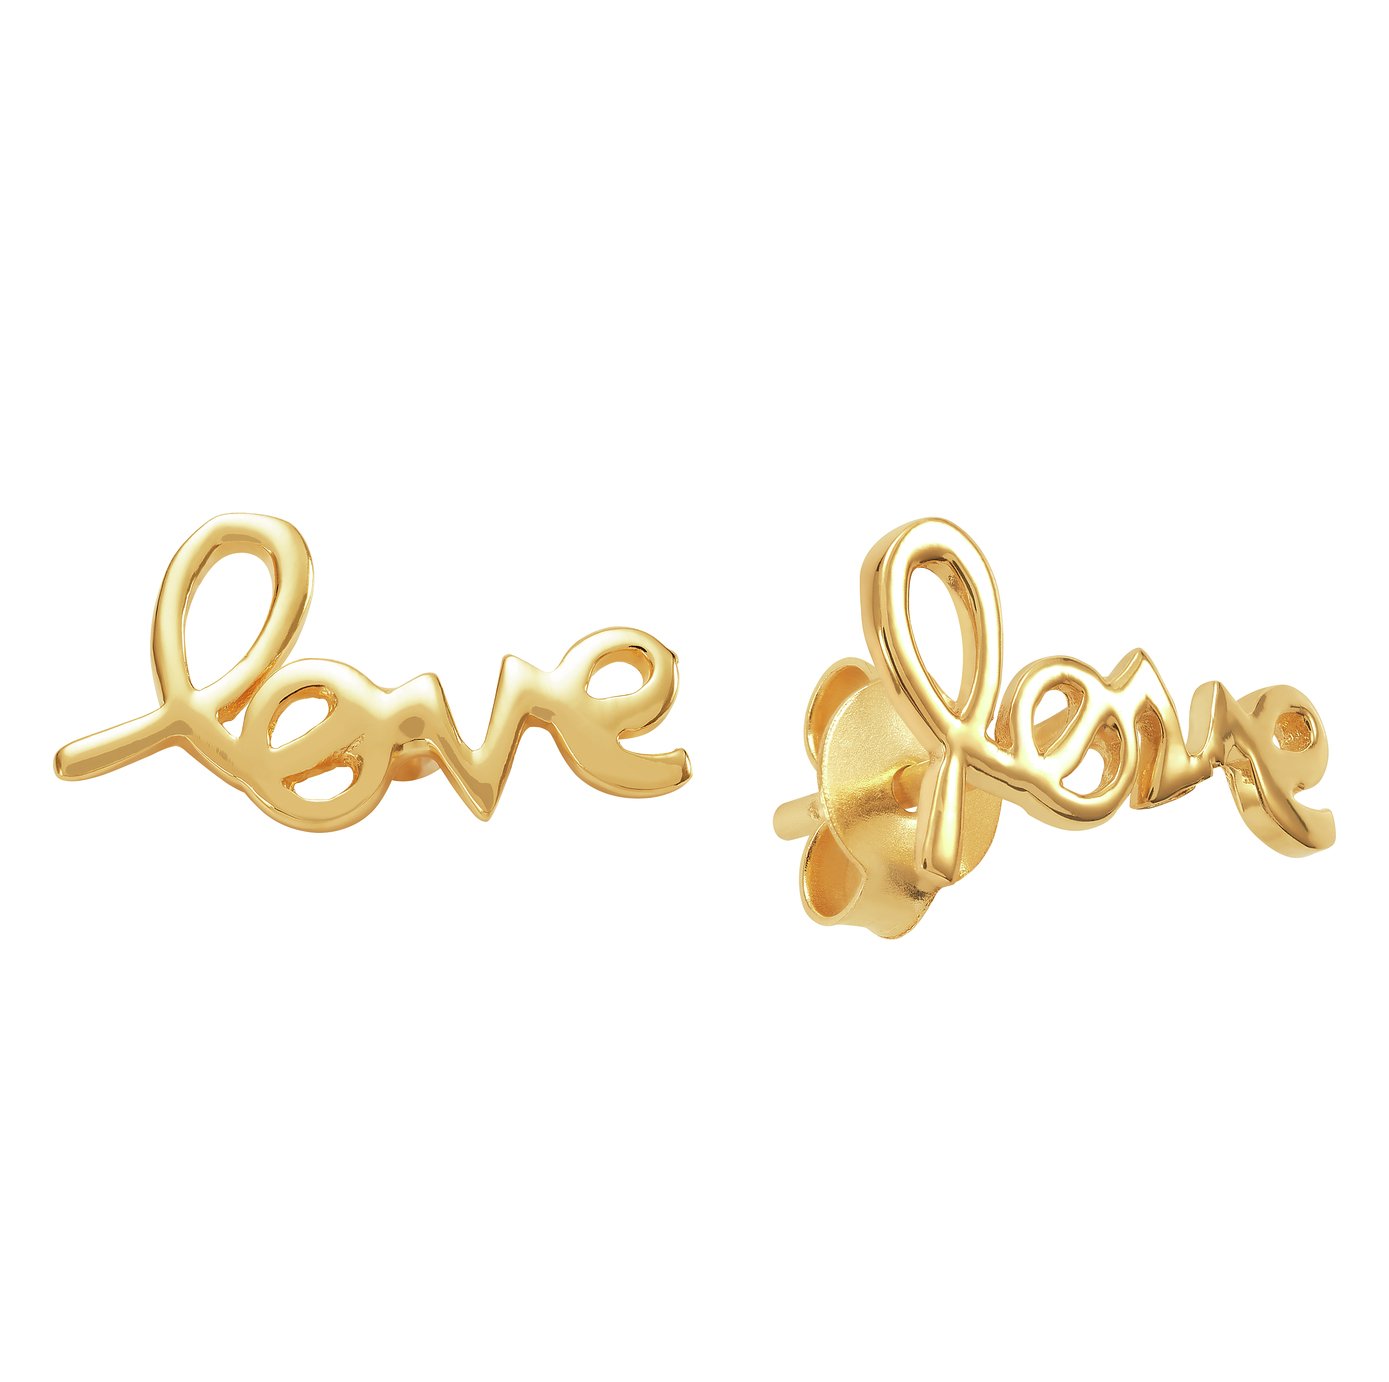 Revere 9ct Gold Plated Sterling Silver Love Stud Earrings Review